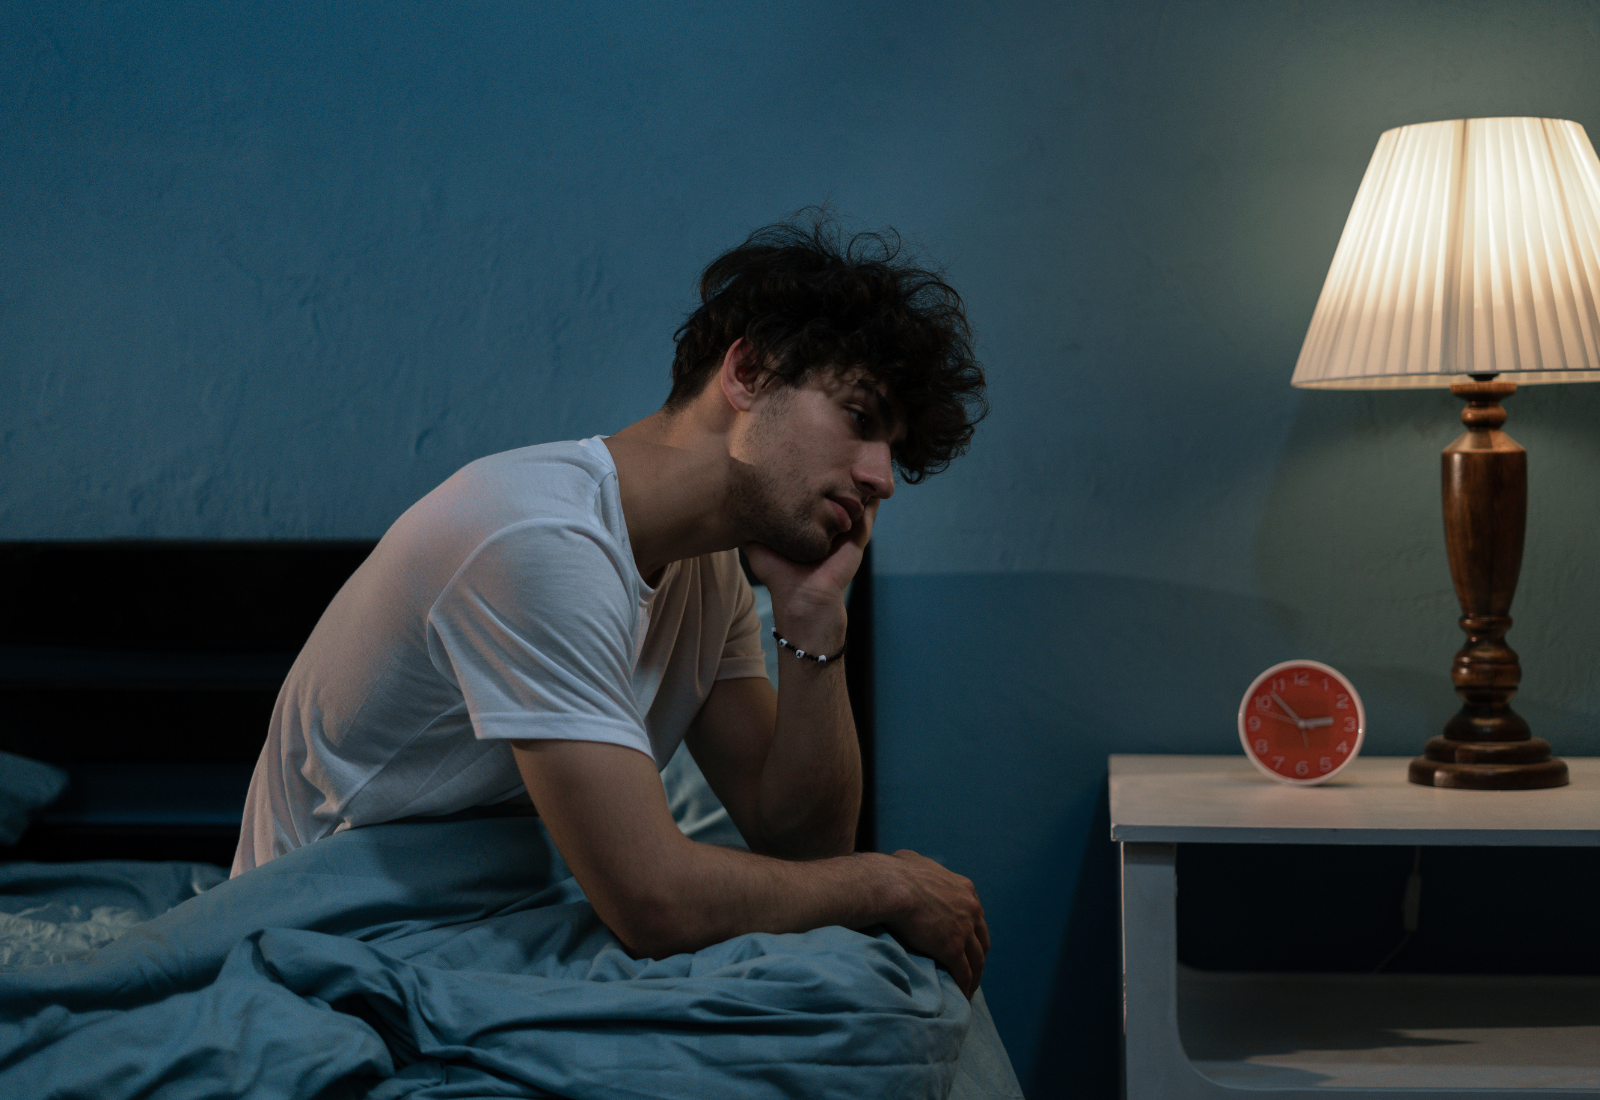 Image of a man appearing depressed sitting on the edge of a bed